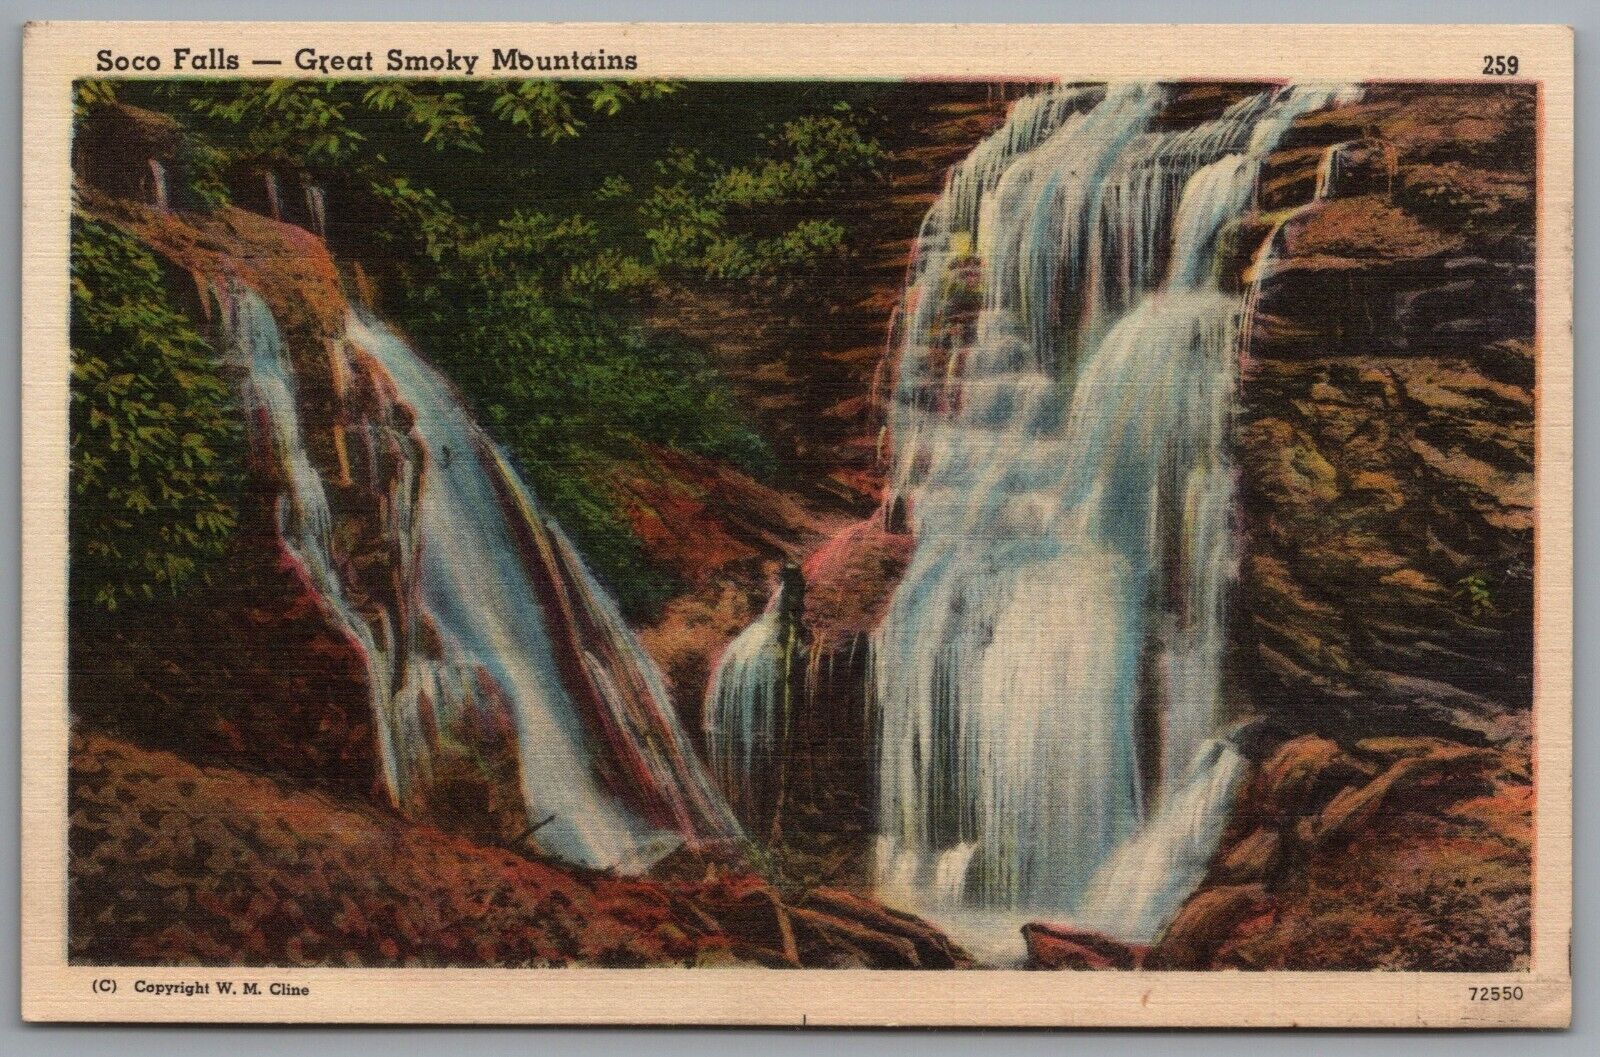 Great Smoky Mountains Soco Falls Cherokee Indian Reservation c1940s Postcard